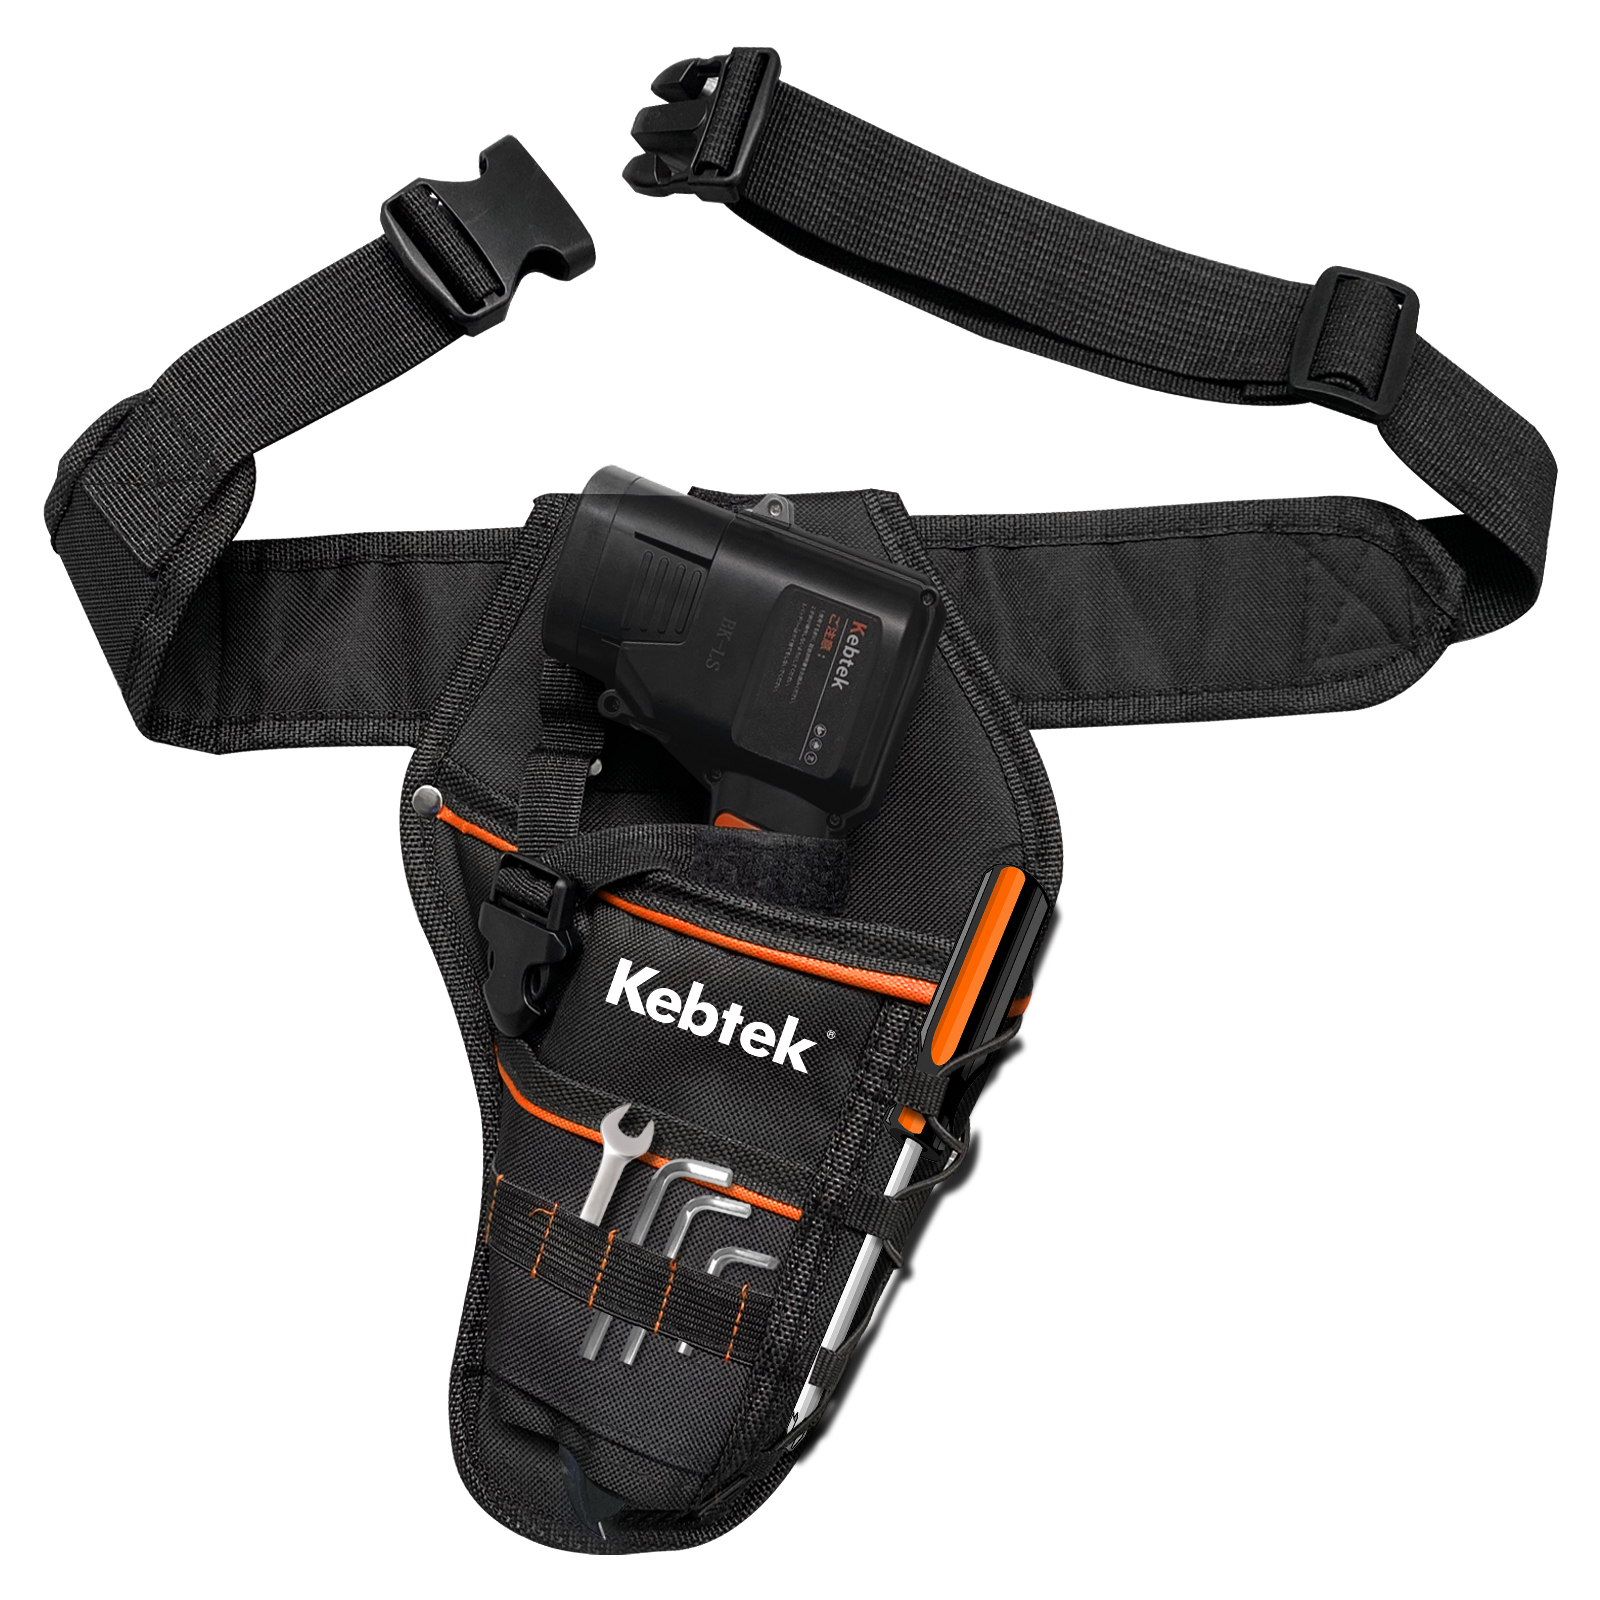 Kebtek Hand Pruner Hanging Pouch, Heavy Duty Construction Tool Belt for Electri Pruning Shear with Battery Pocket Tool Pouch - Adjusts from 33 Inches to 42 Inches (Black)